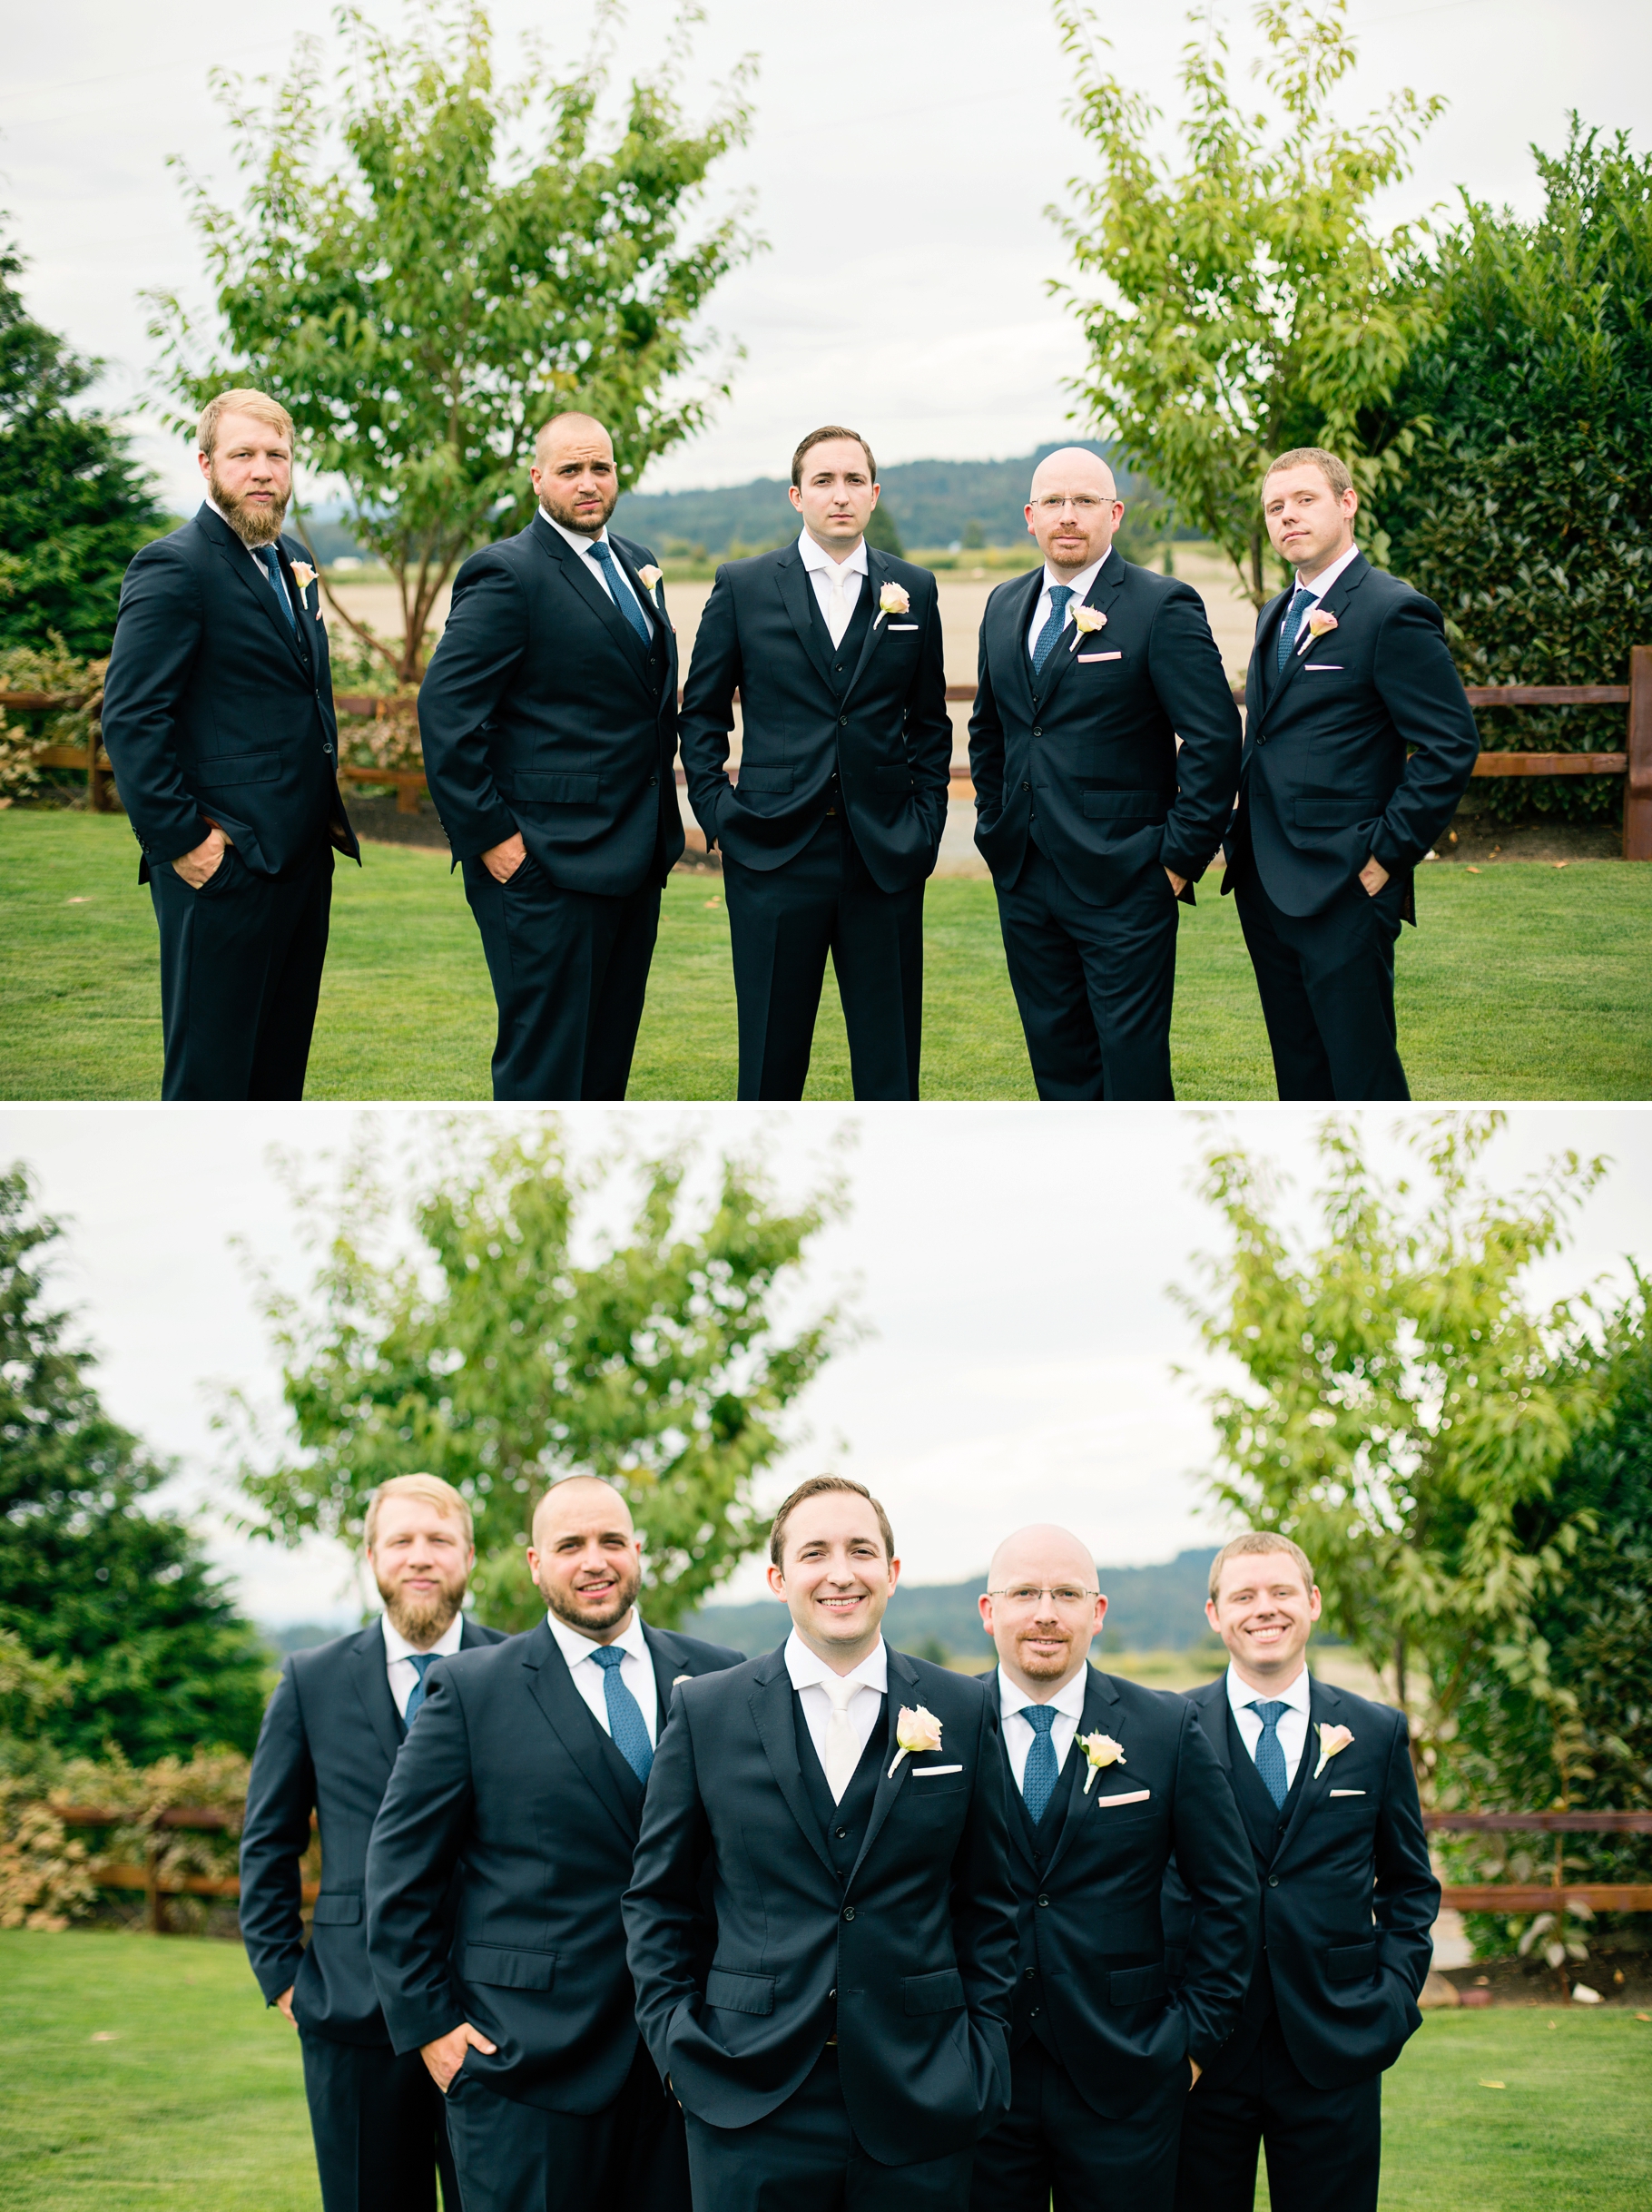 22-Wedding-Party-Portraits-Groom-Navy-Suits-Groomsmen-Hidden-Meadows-Snohomish-Wedding-Photographer-Northwest-Seattle-Photography-by-Betty-Elaine